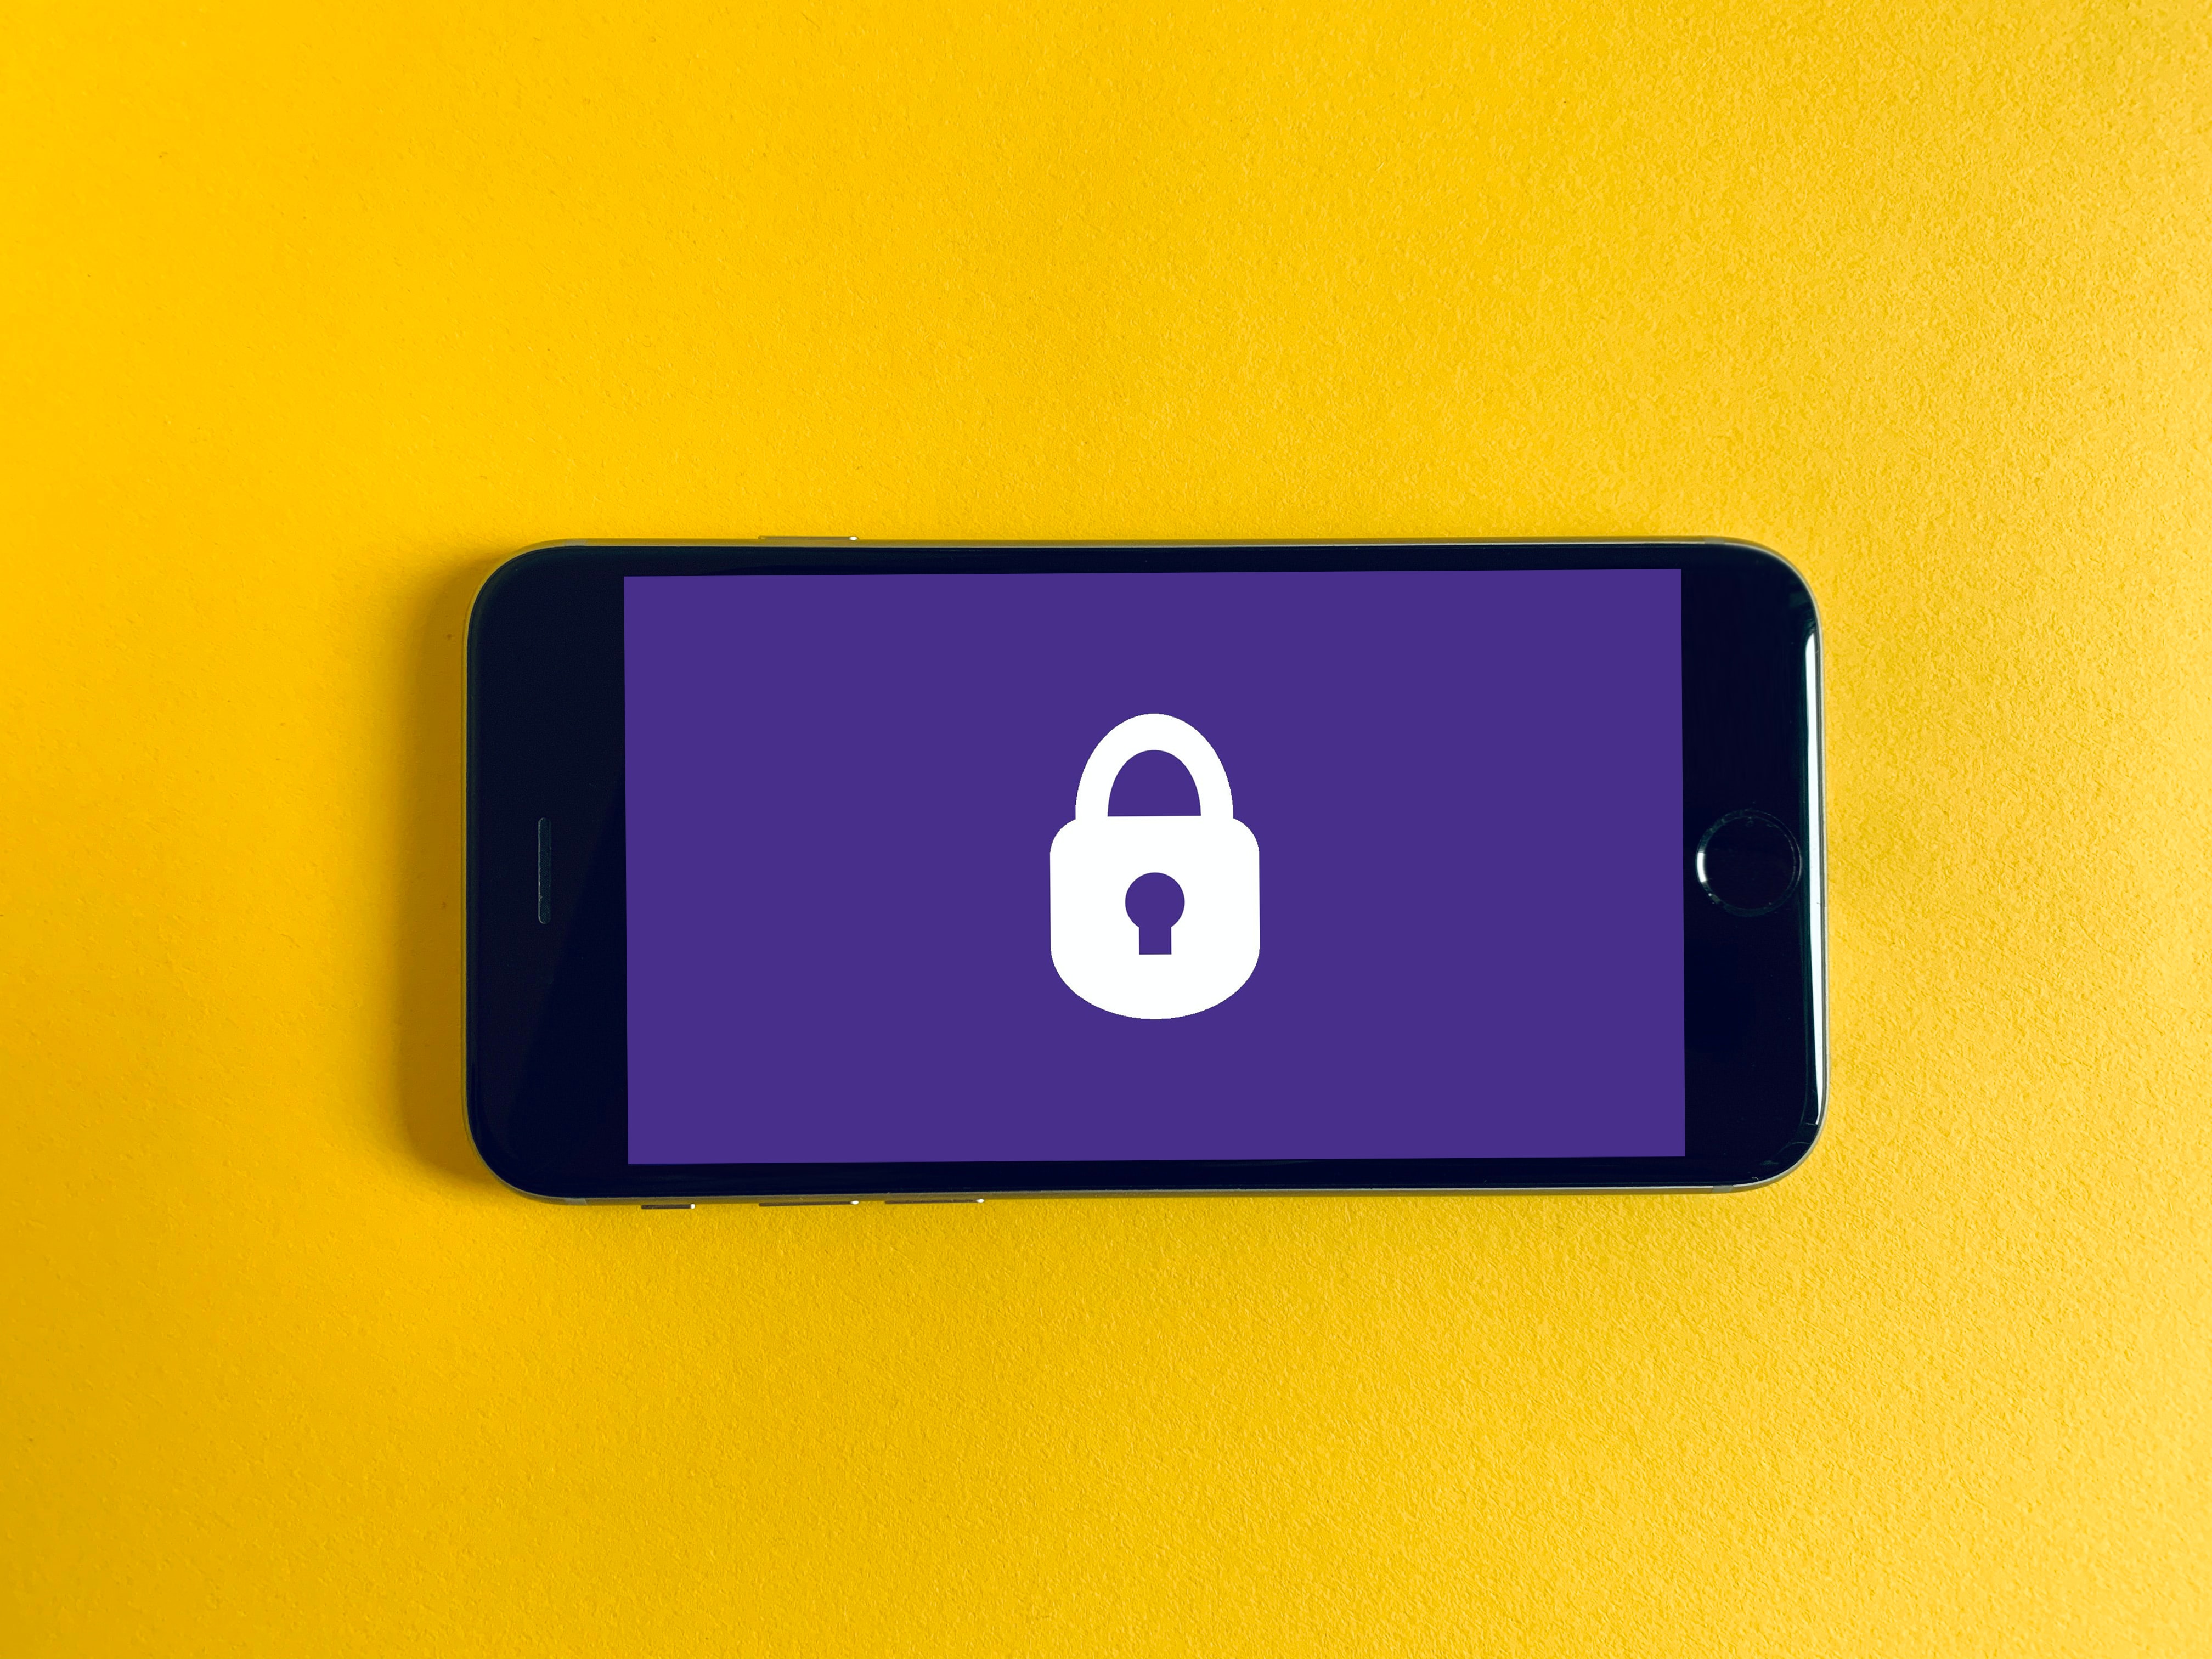 Mobile phone with purple screen and a white padlock on an orange background